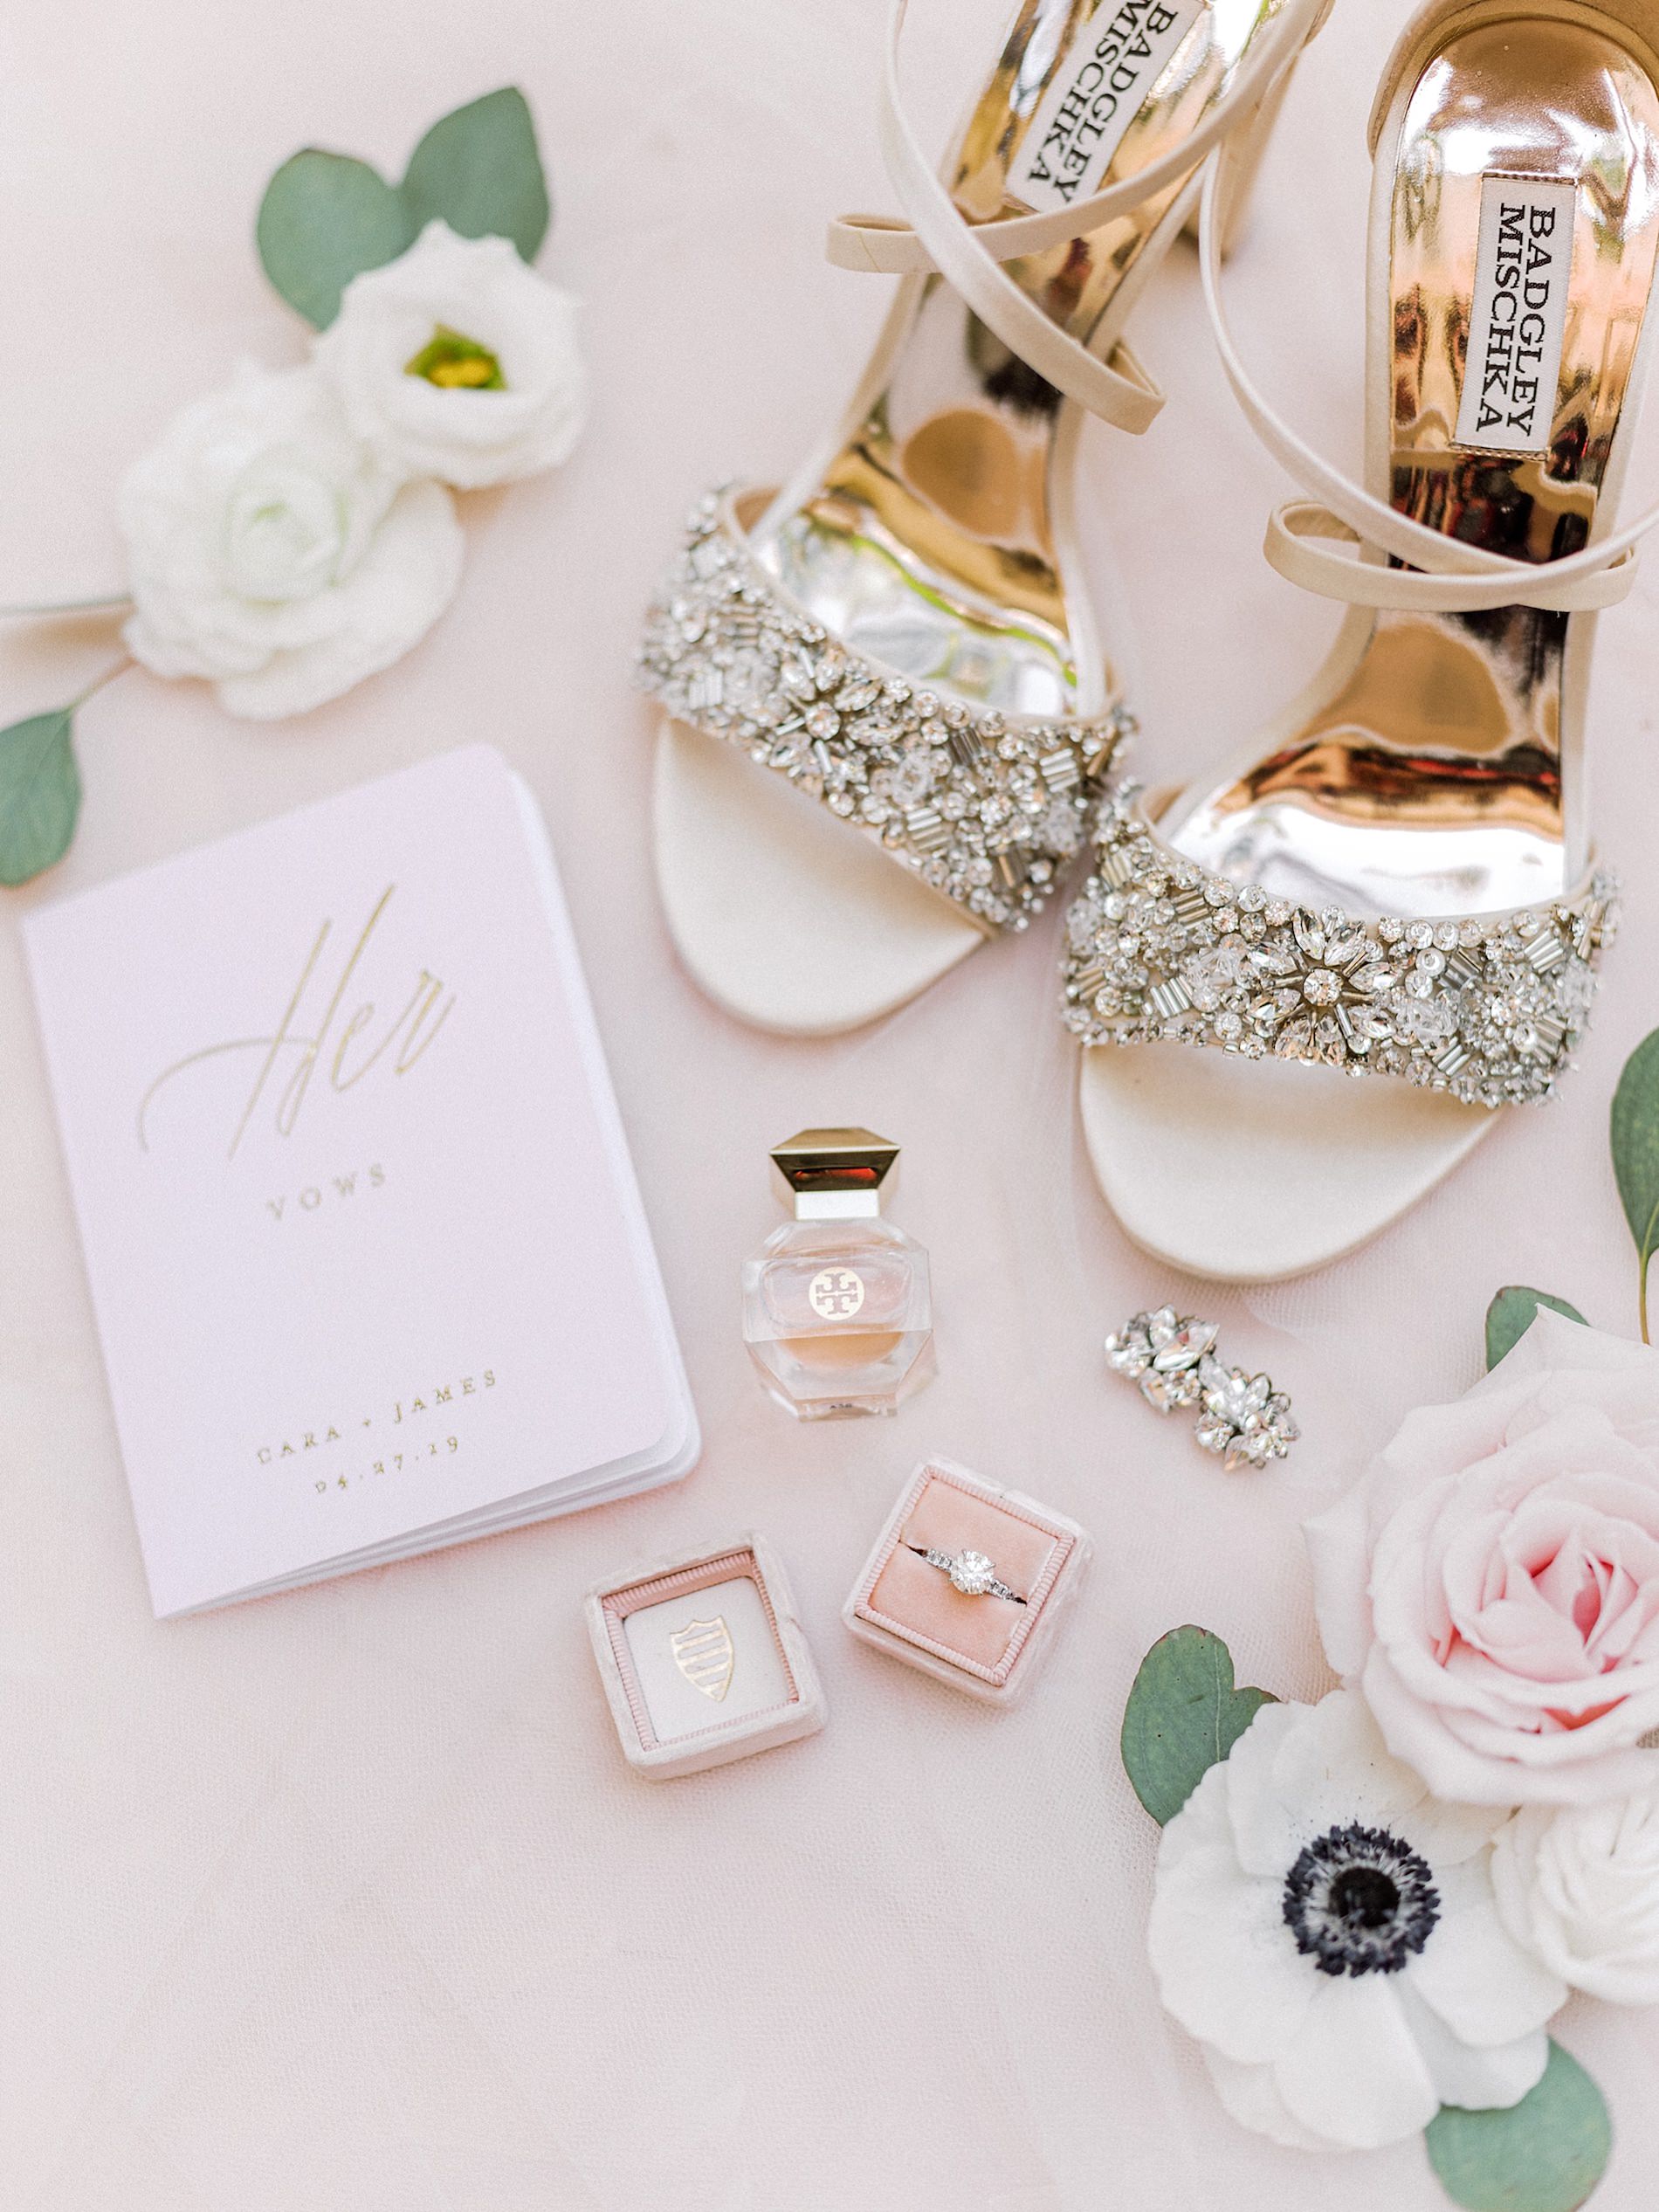 Badgley Mischka Ivory Chunky Rhinestone Strappy Sandal Wedding Shoes, Gold Foil Her Vows Book, Solitaire Round Diamond Engagement Ring in Blush Pink Ring Box